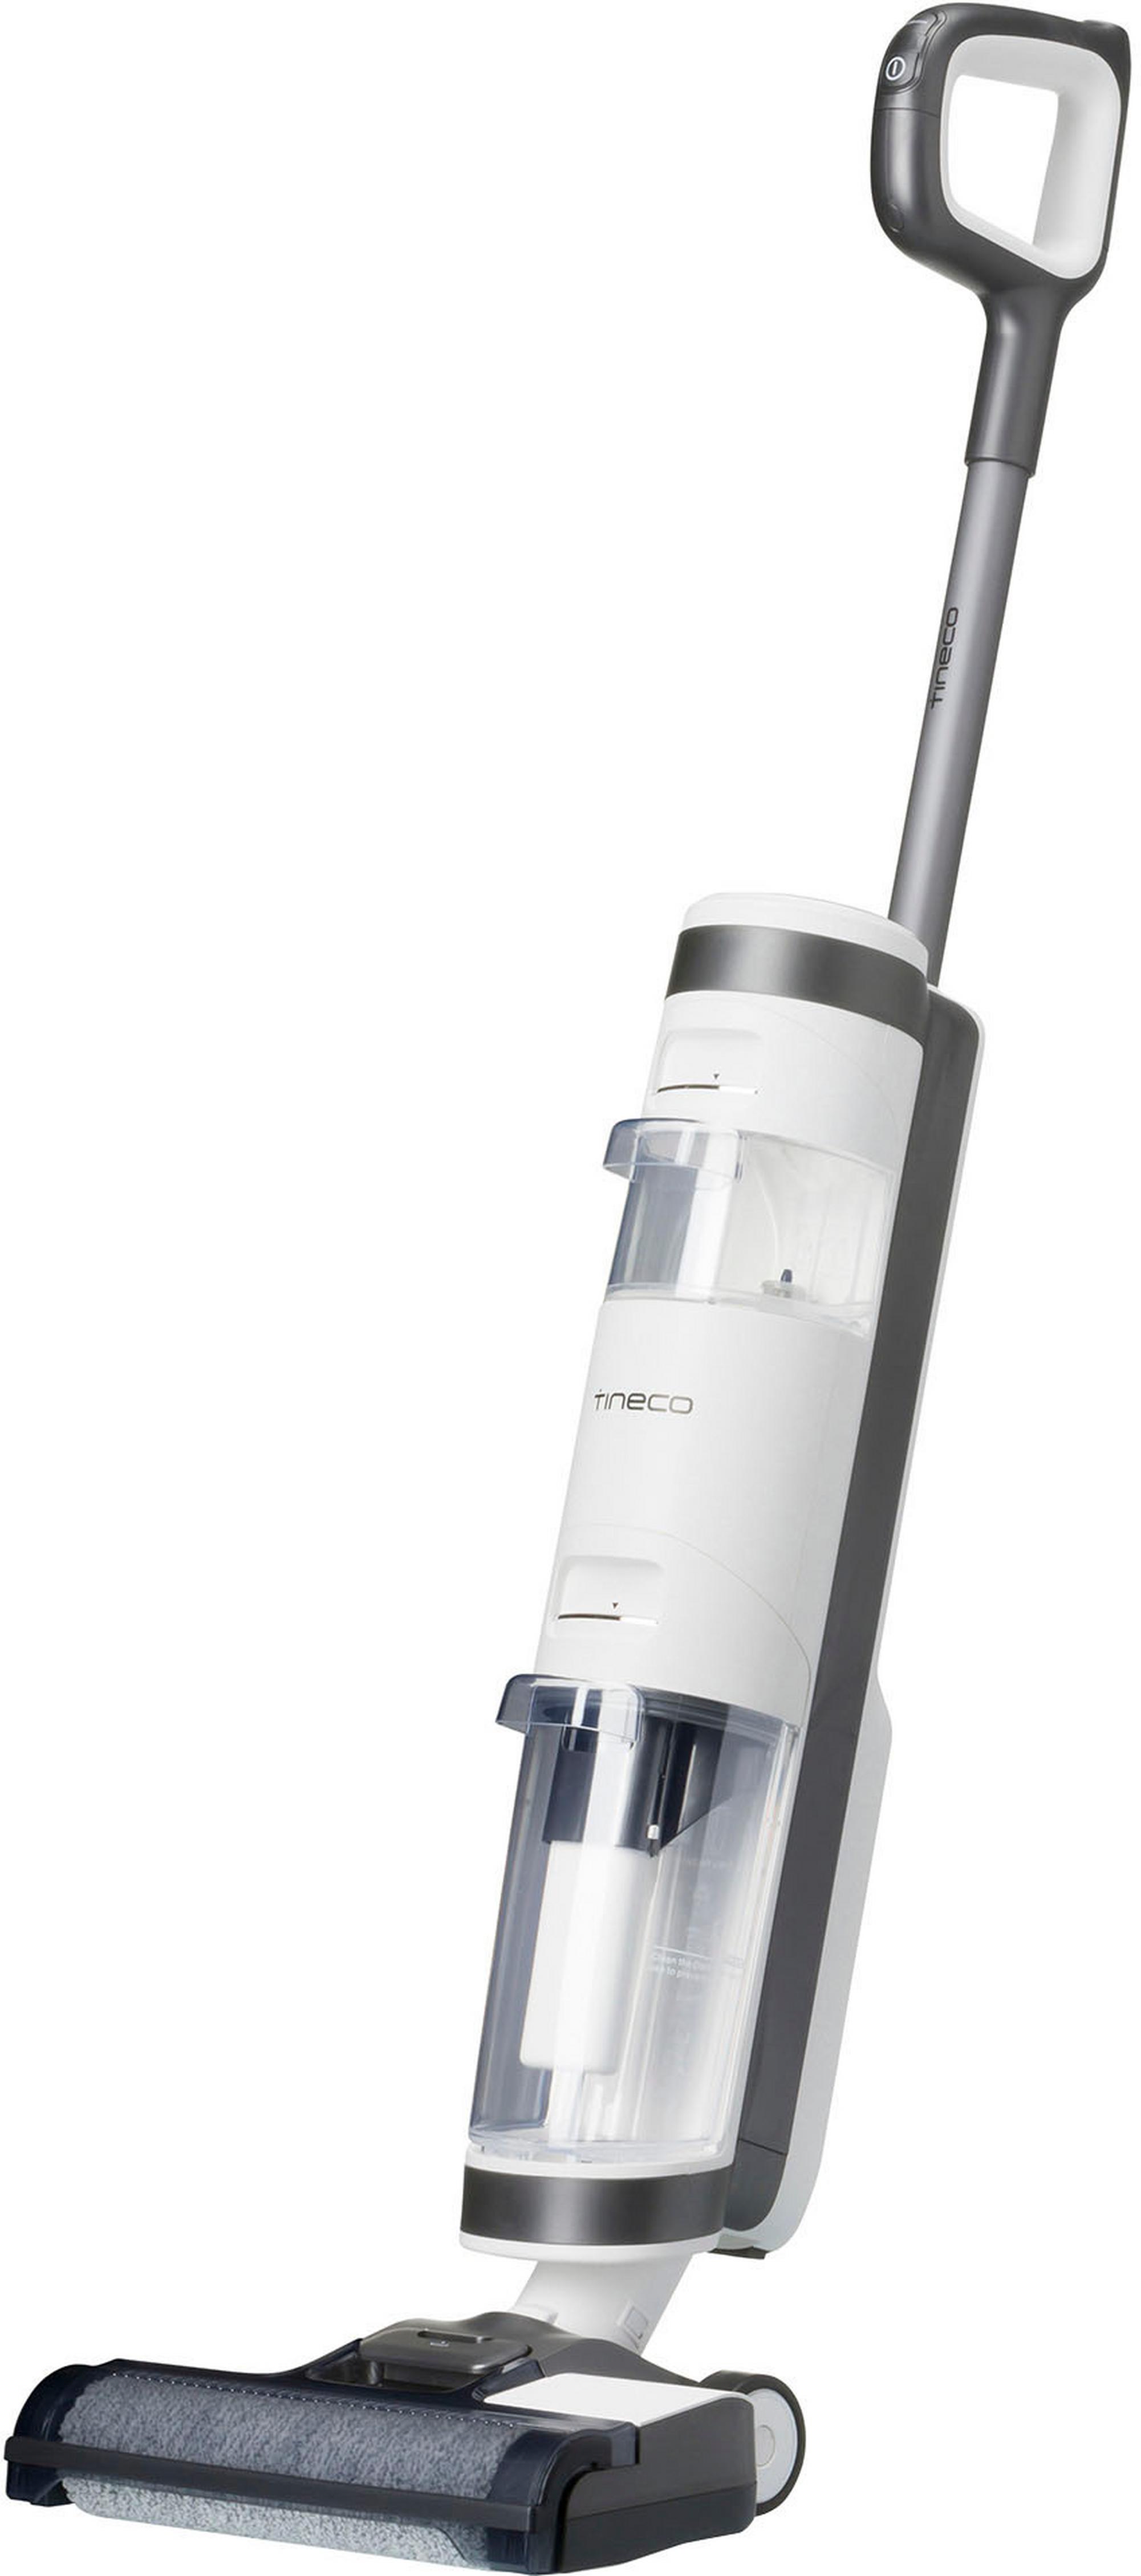 Tineco S5 Extreme Broom Vacuum Cleaner Silver